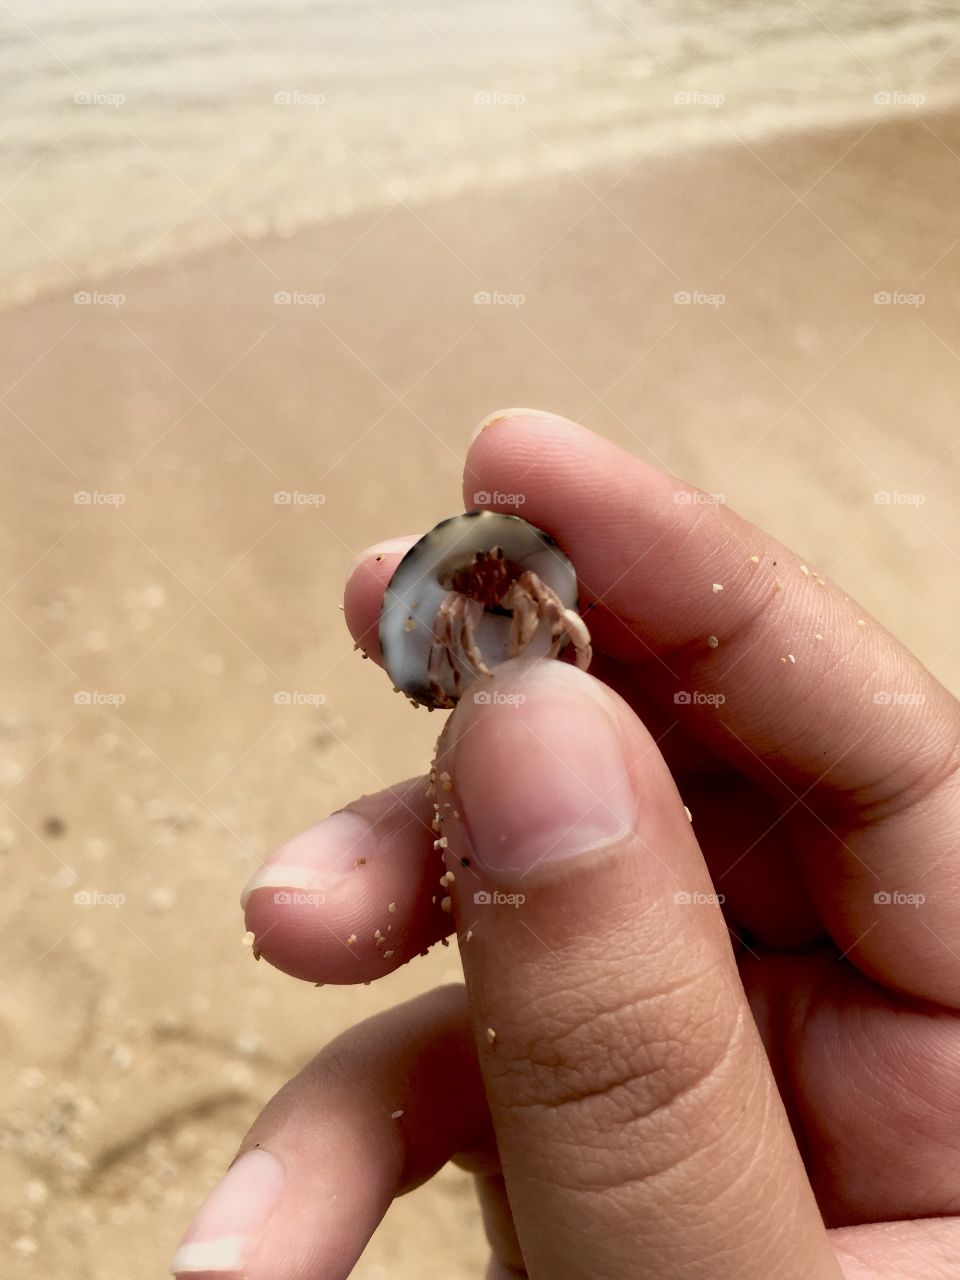 A tiny hermit crab on the beach